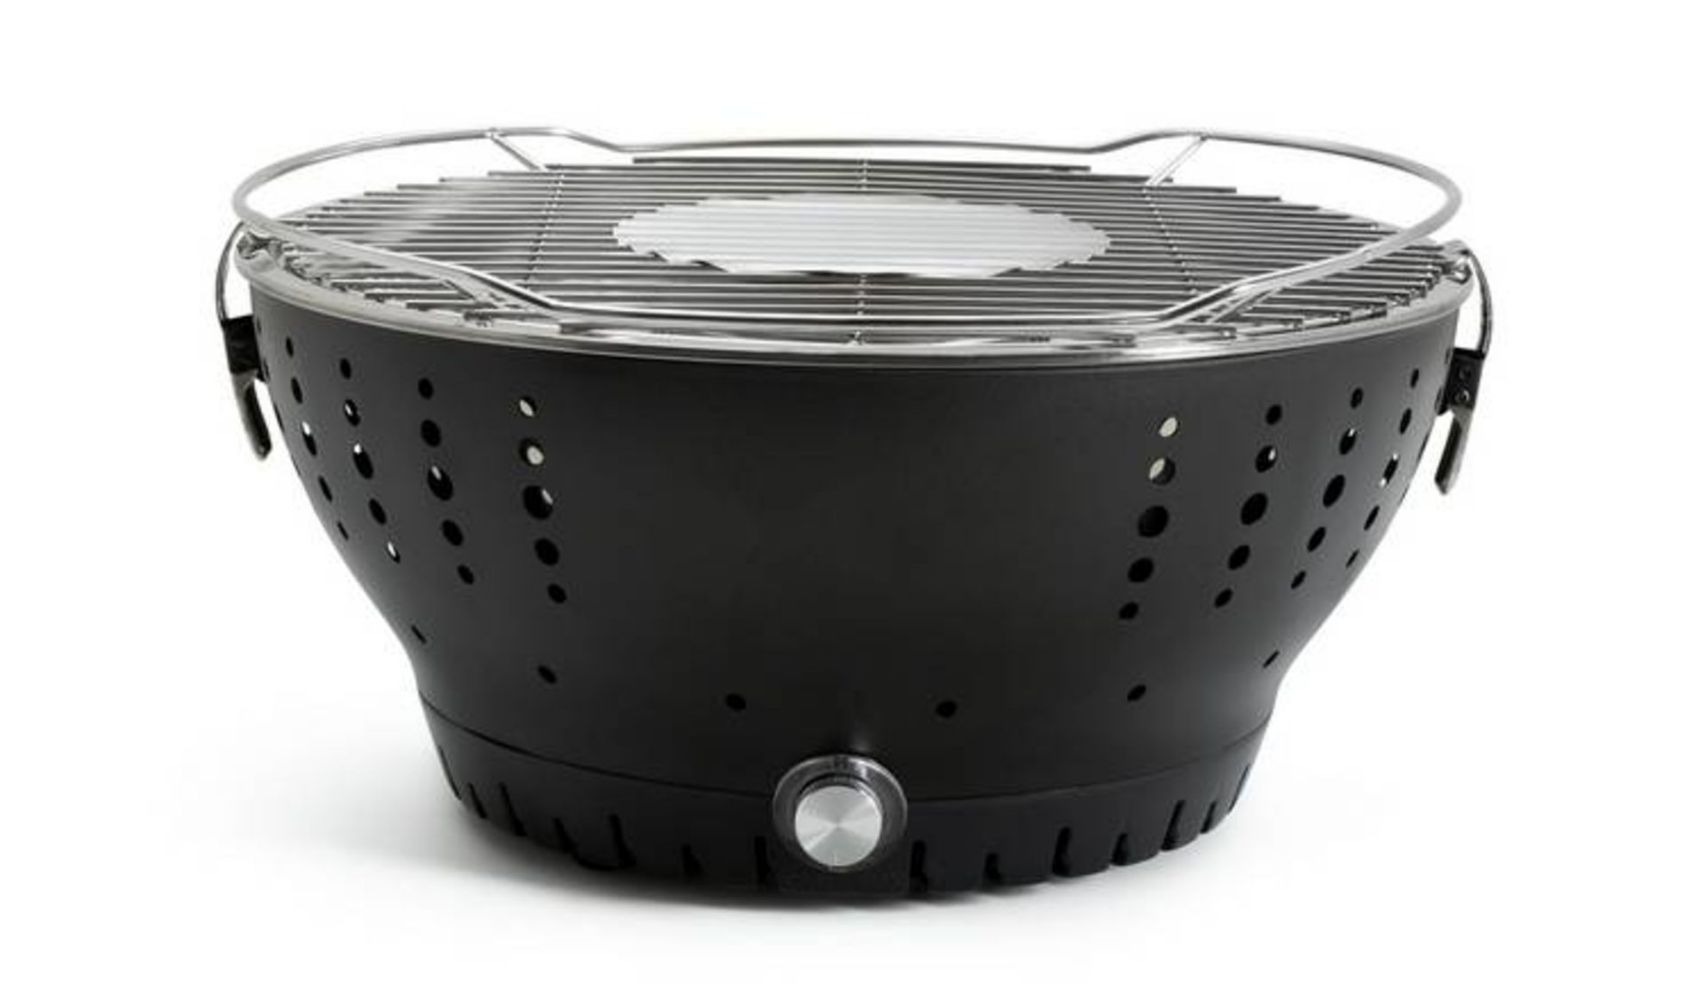 Pallet And Trade Sale of Brand New Charcoal BBQ's With Built In Fans. Delivery Available